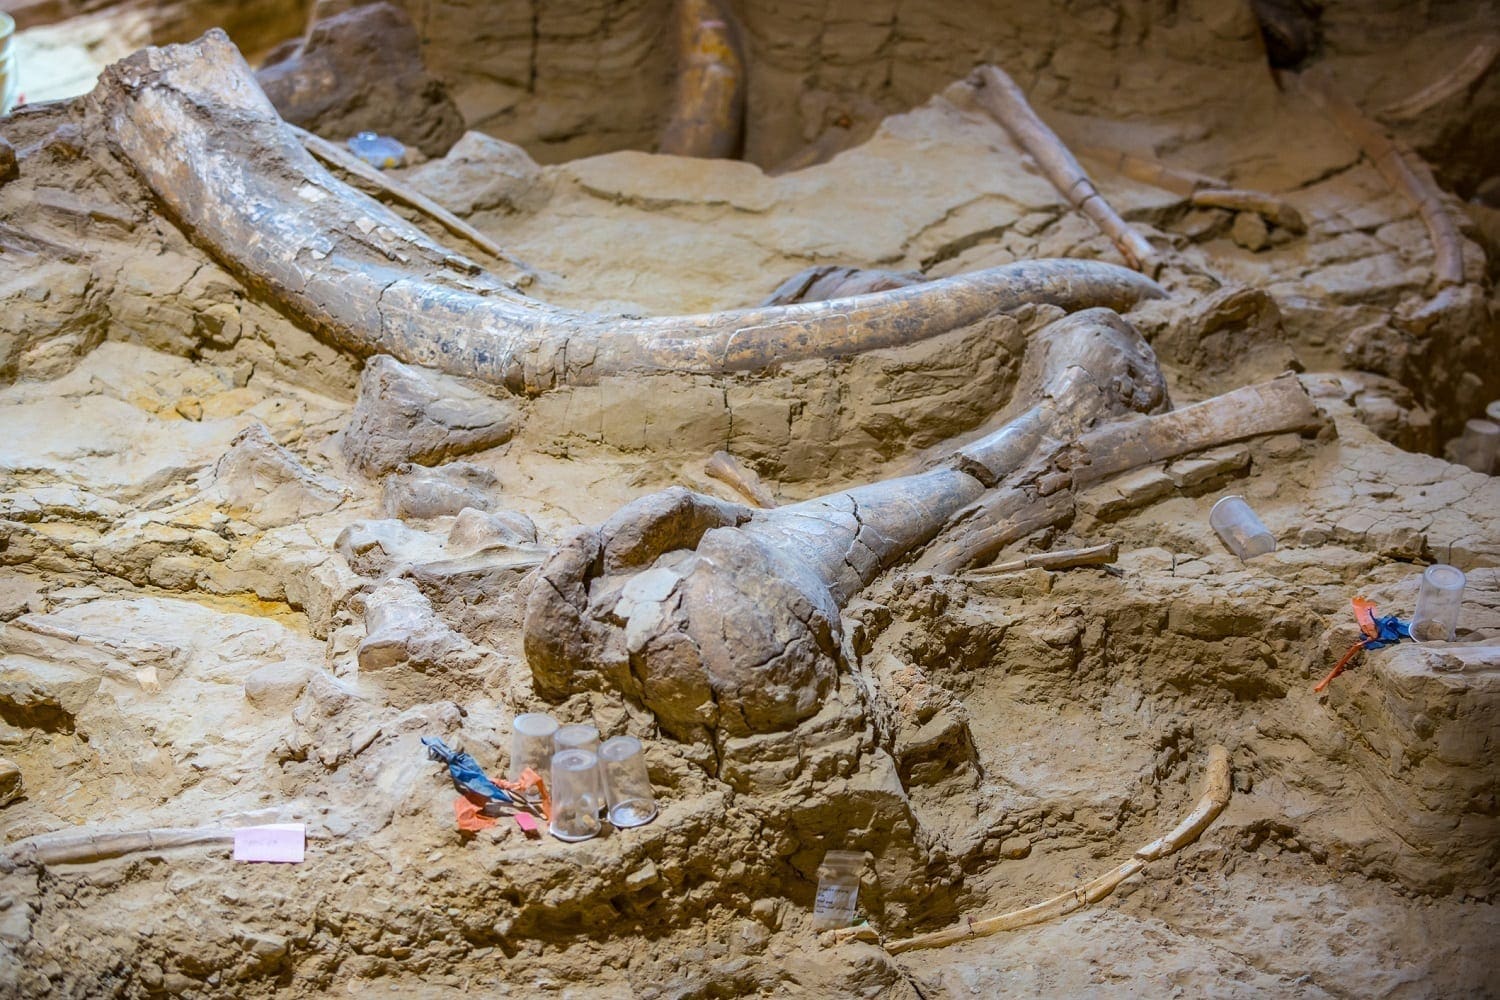 Mammoth fossil dig site: